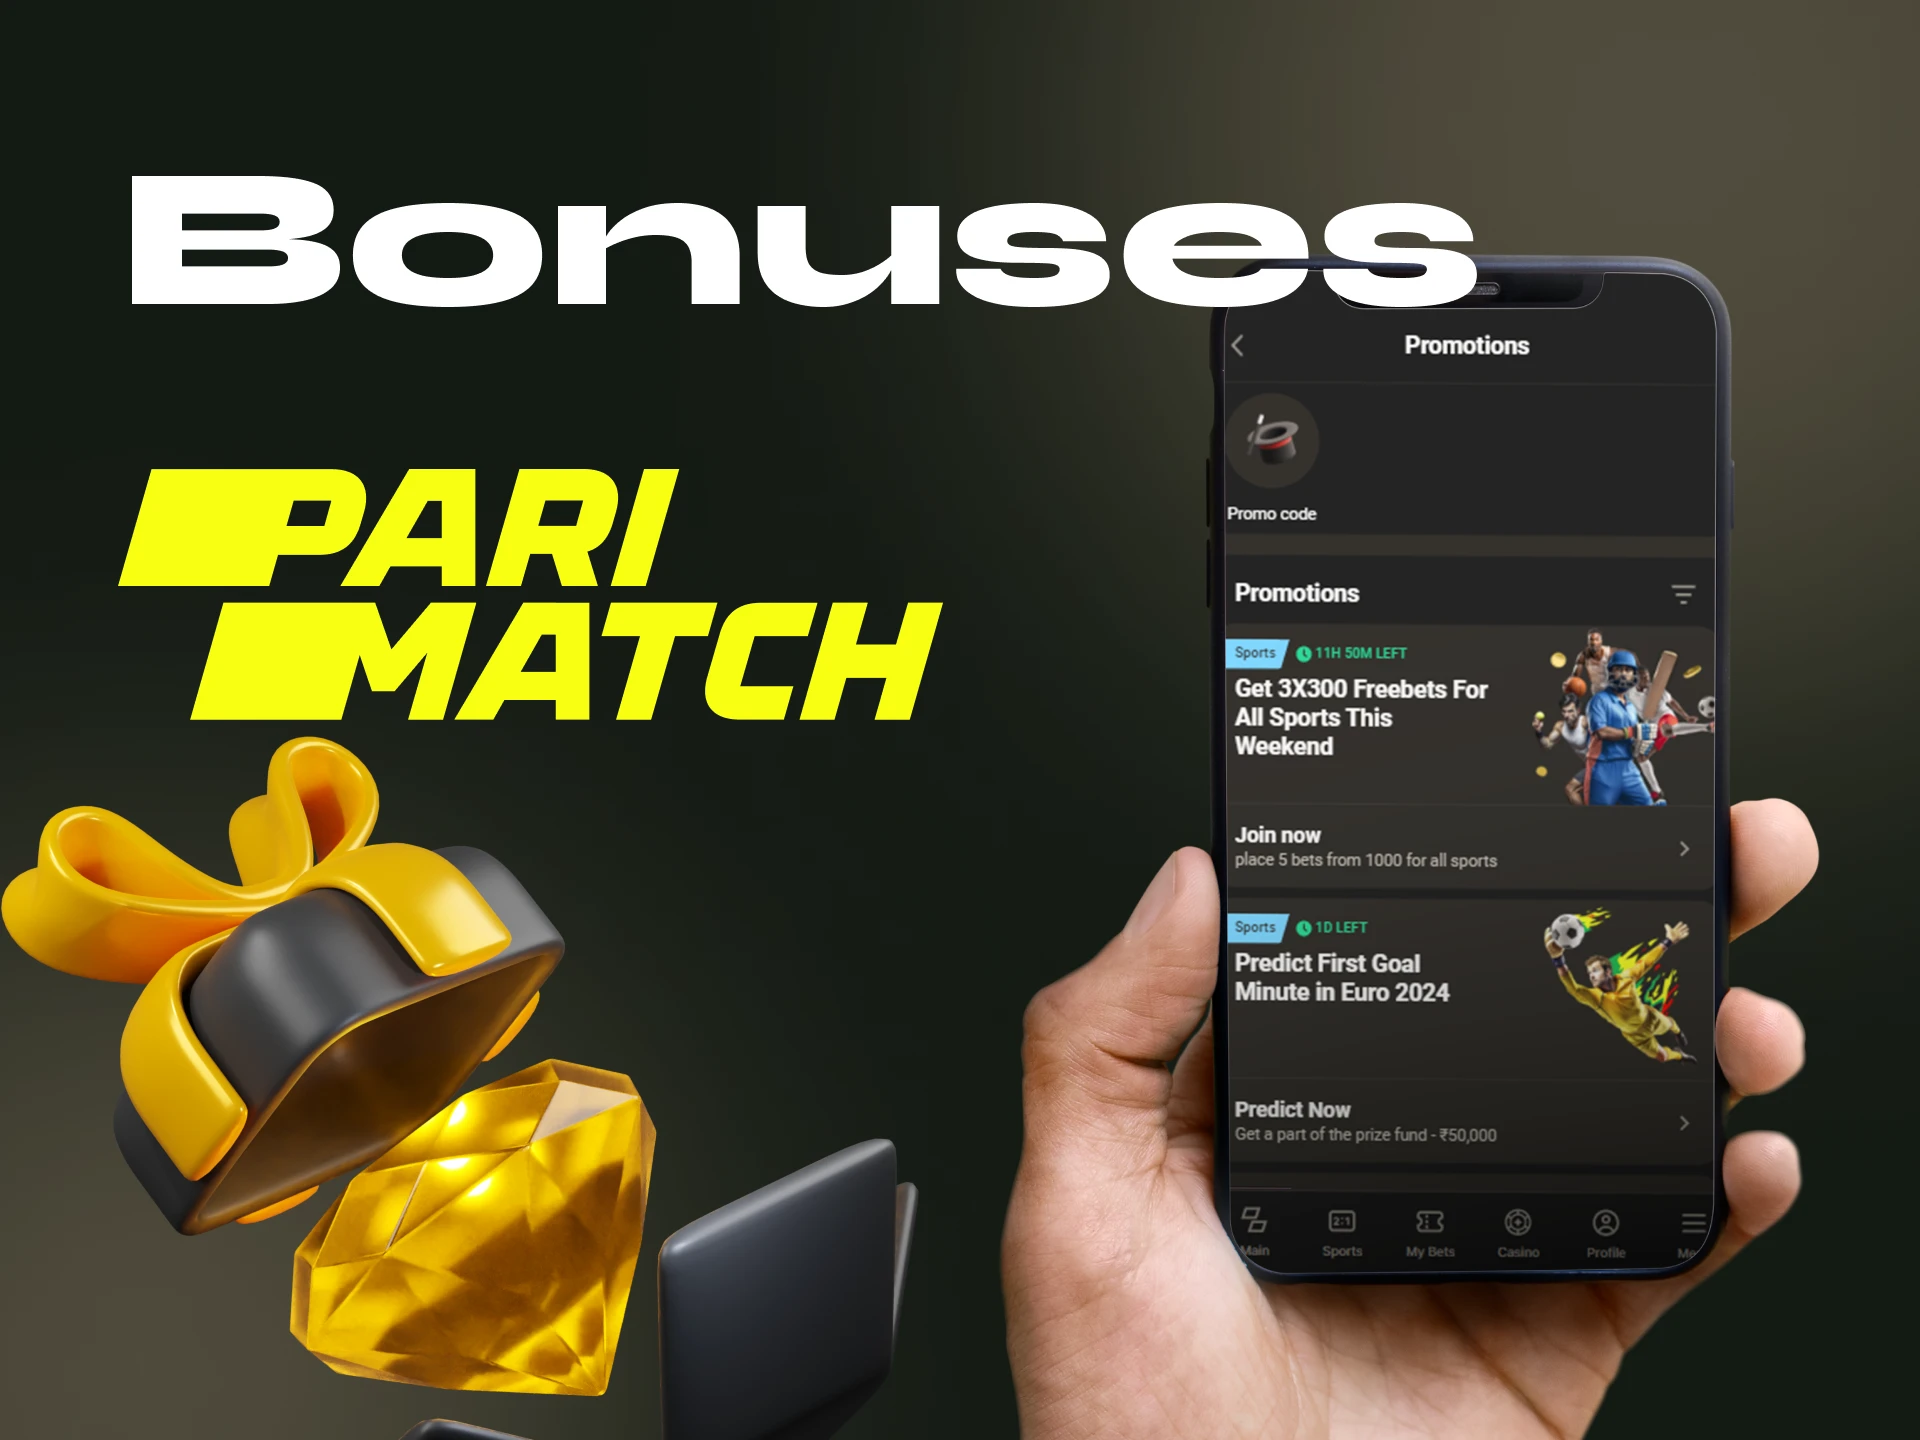 What bonuses can I get at Parimatch online casino if I play in the app.